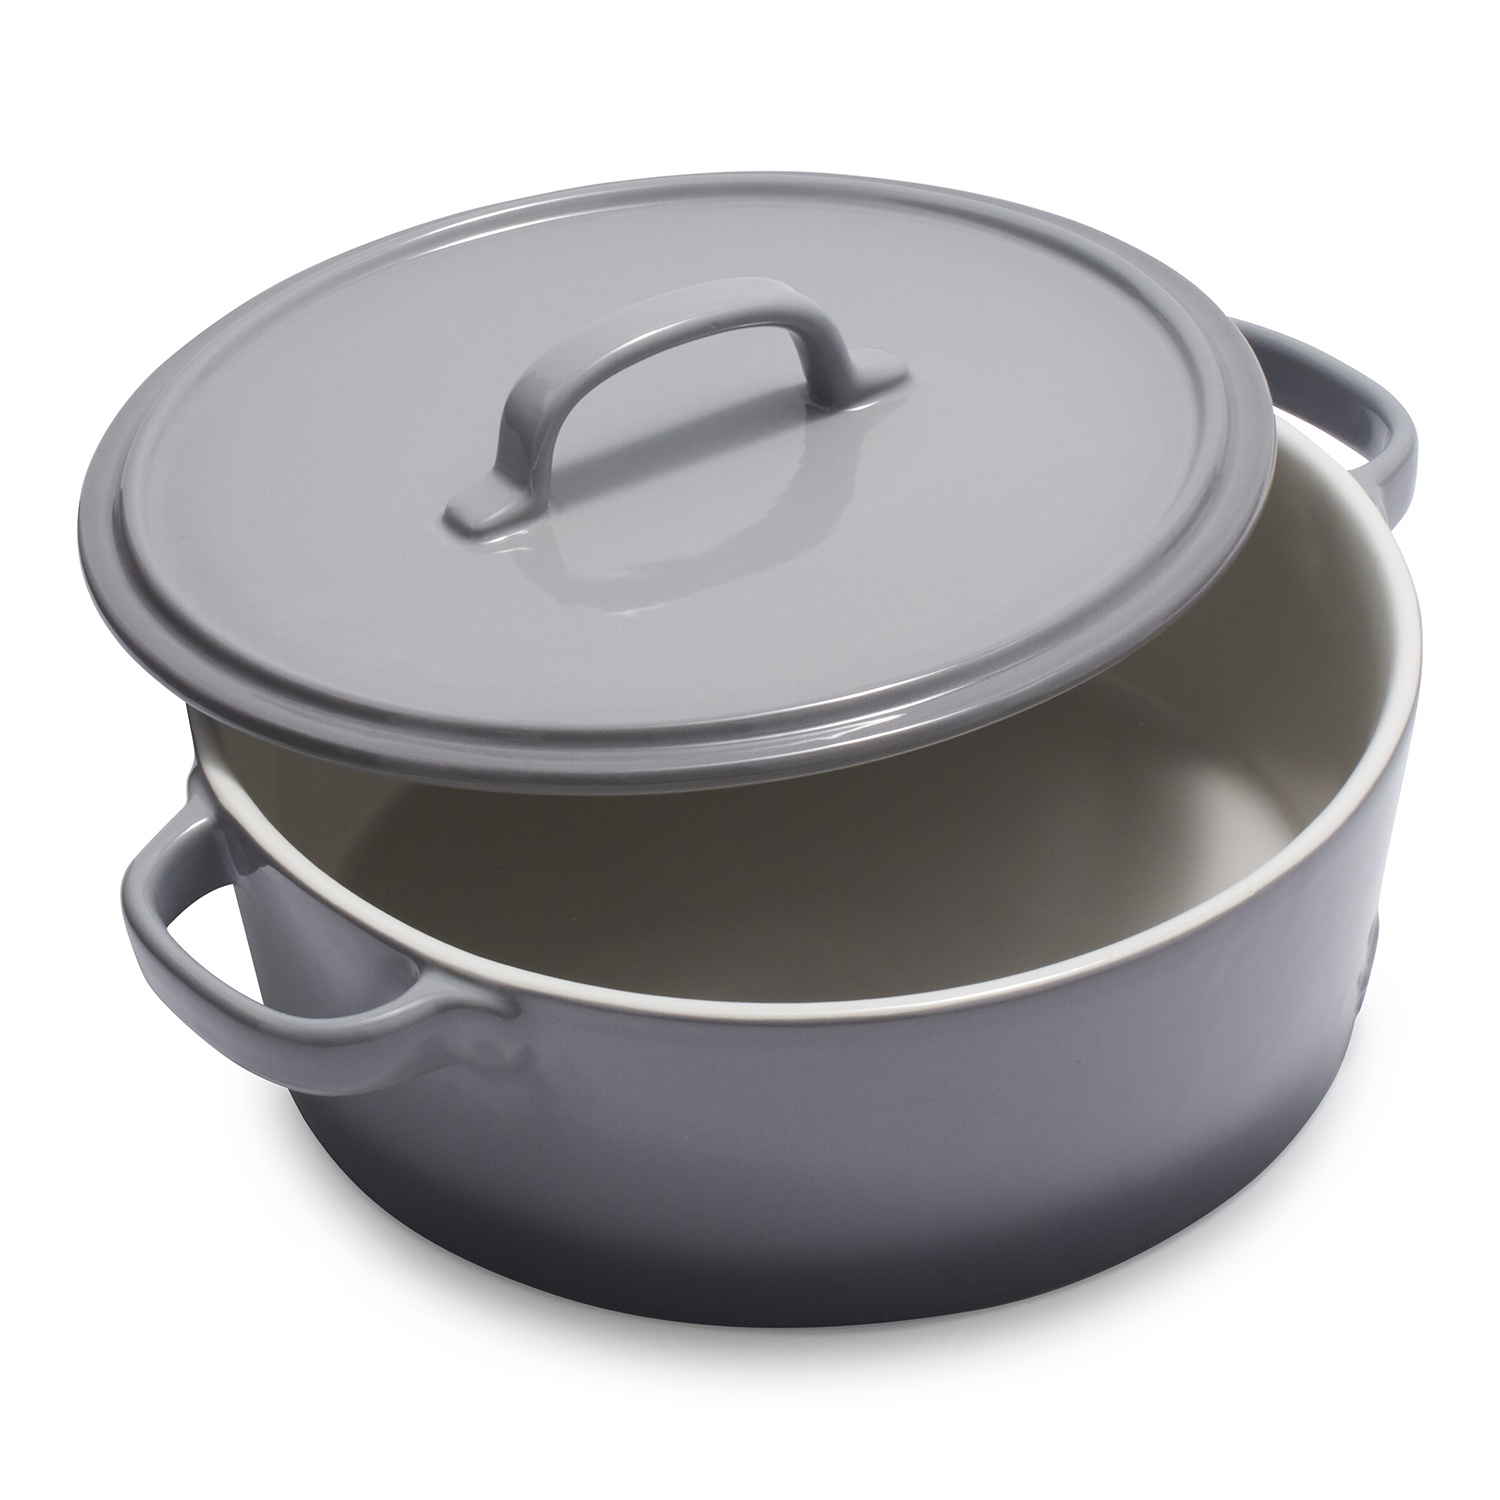 slide 1 of 1, La Marque 84 Oven to Table Round Casserole with Lid, Gray, 4.5 qt